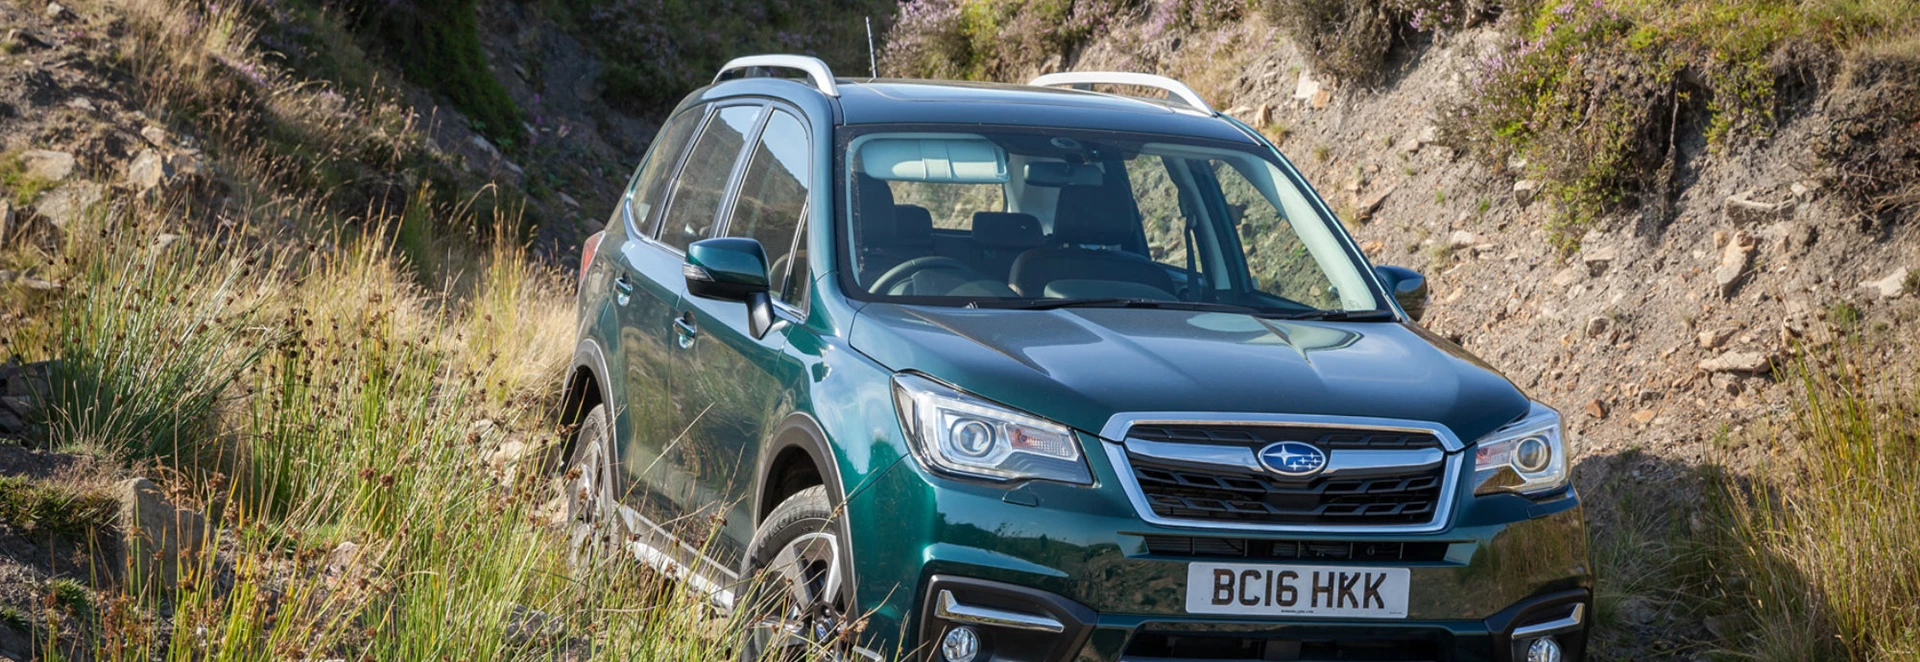 Subaru Forester 2.0D XC SUV review 